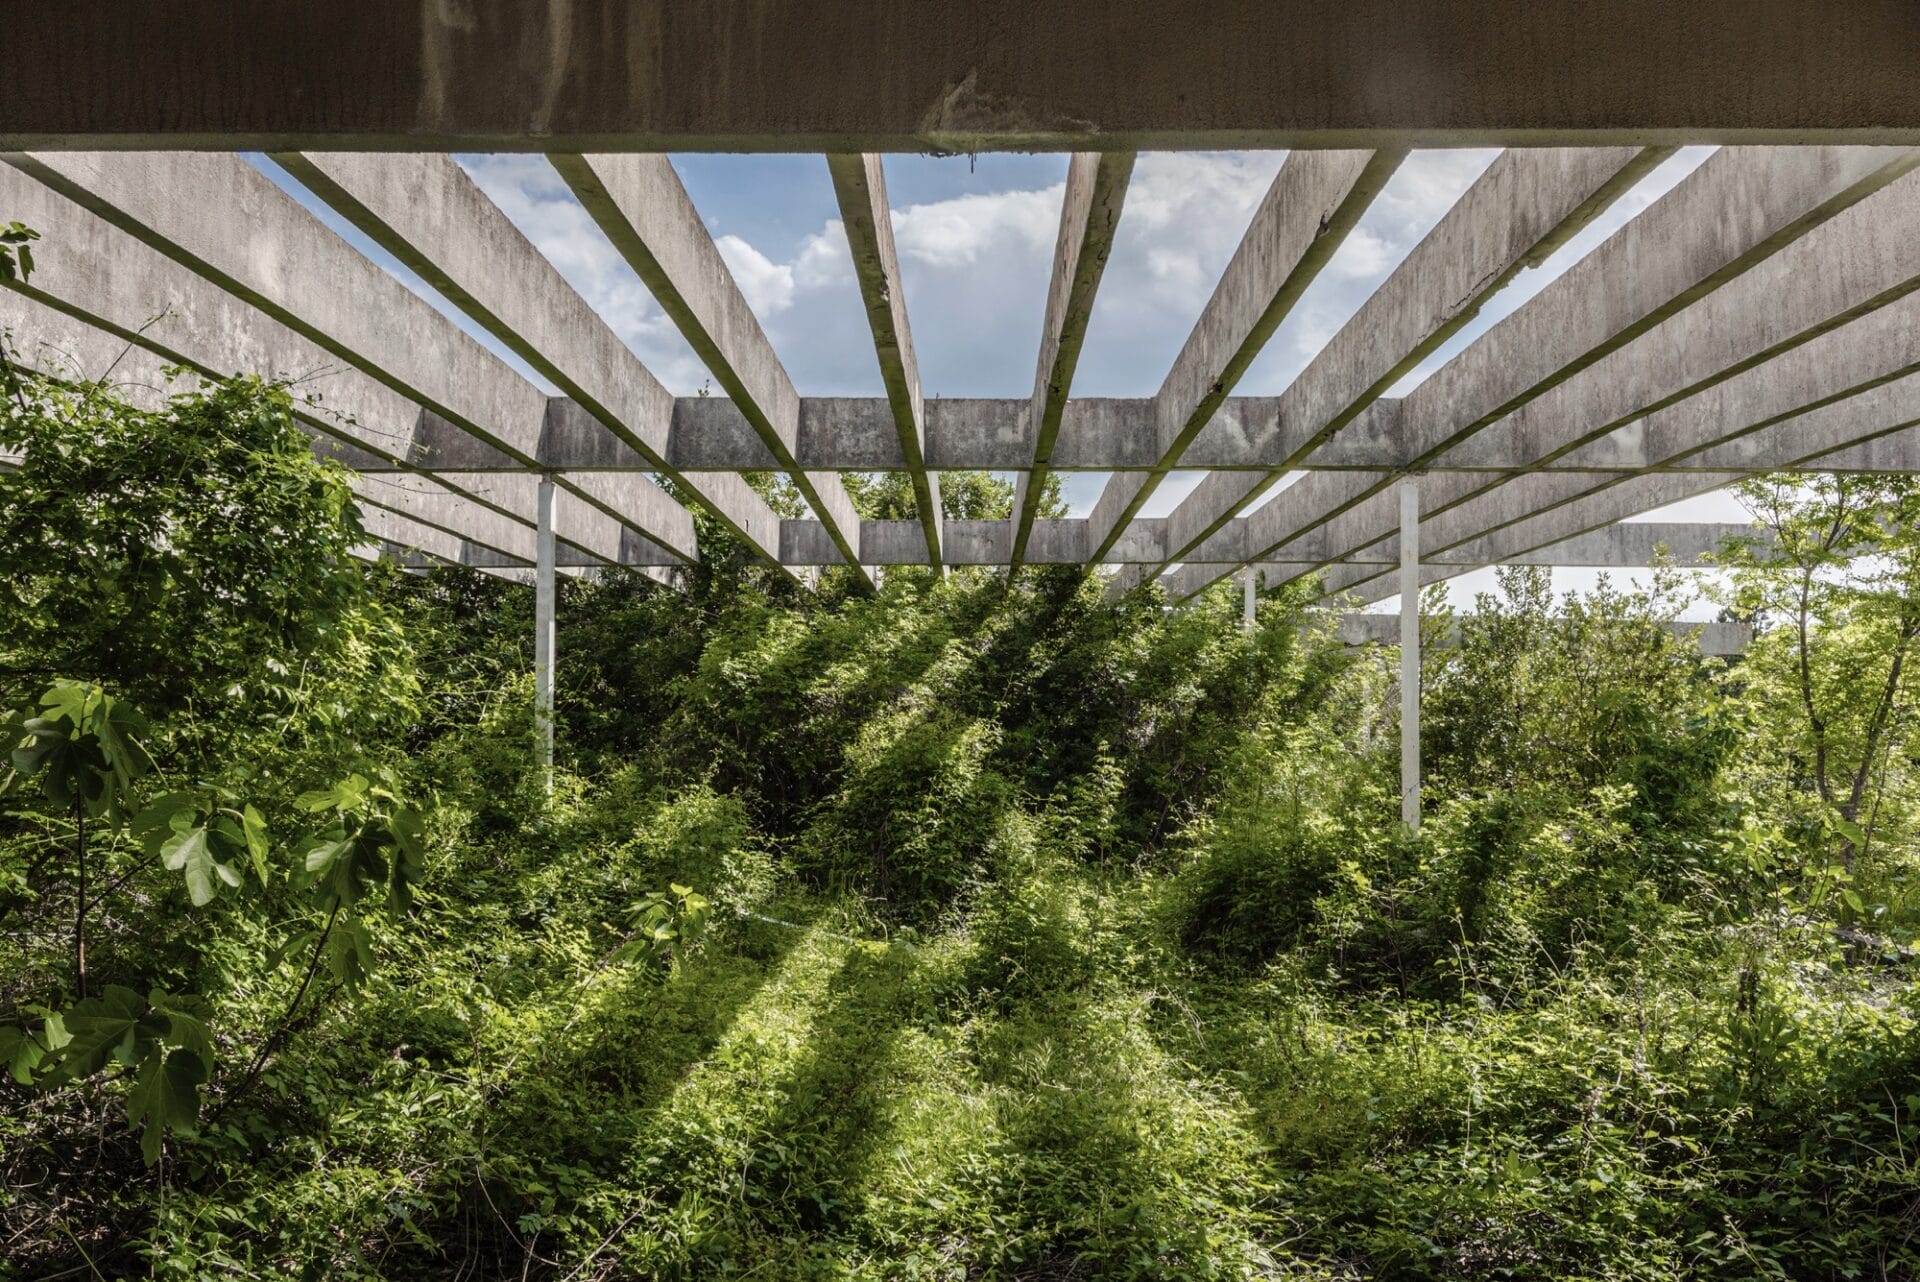 lush greenery underneath an open concrete screen held up by pillars